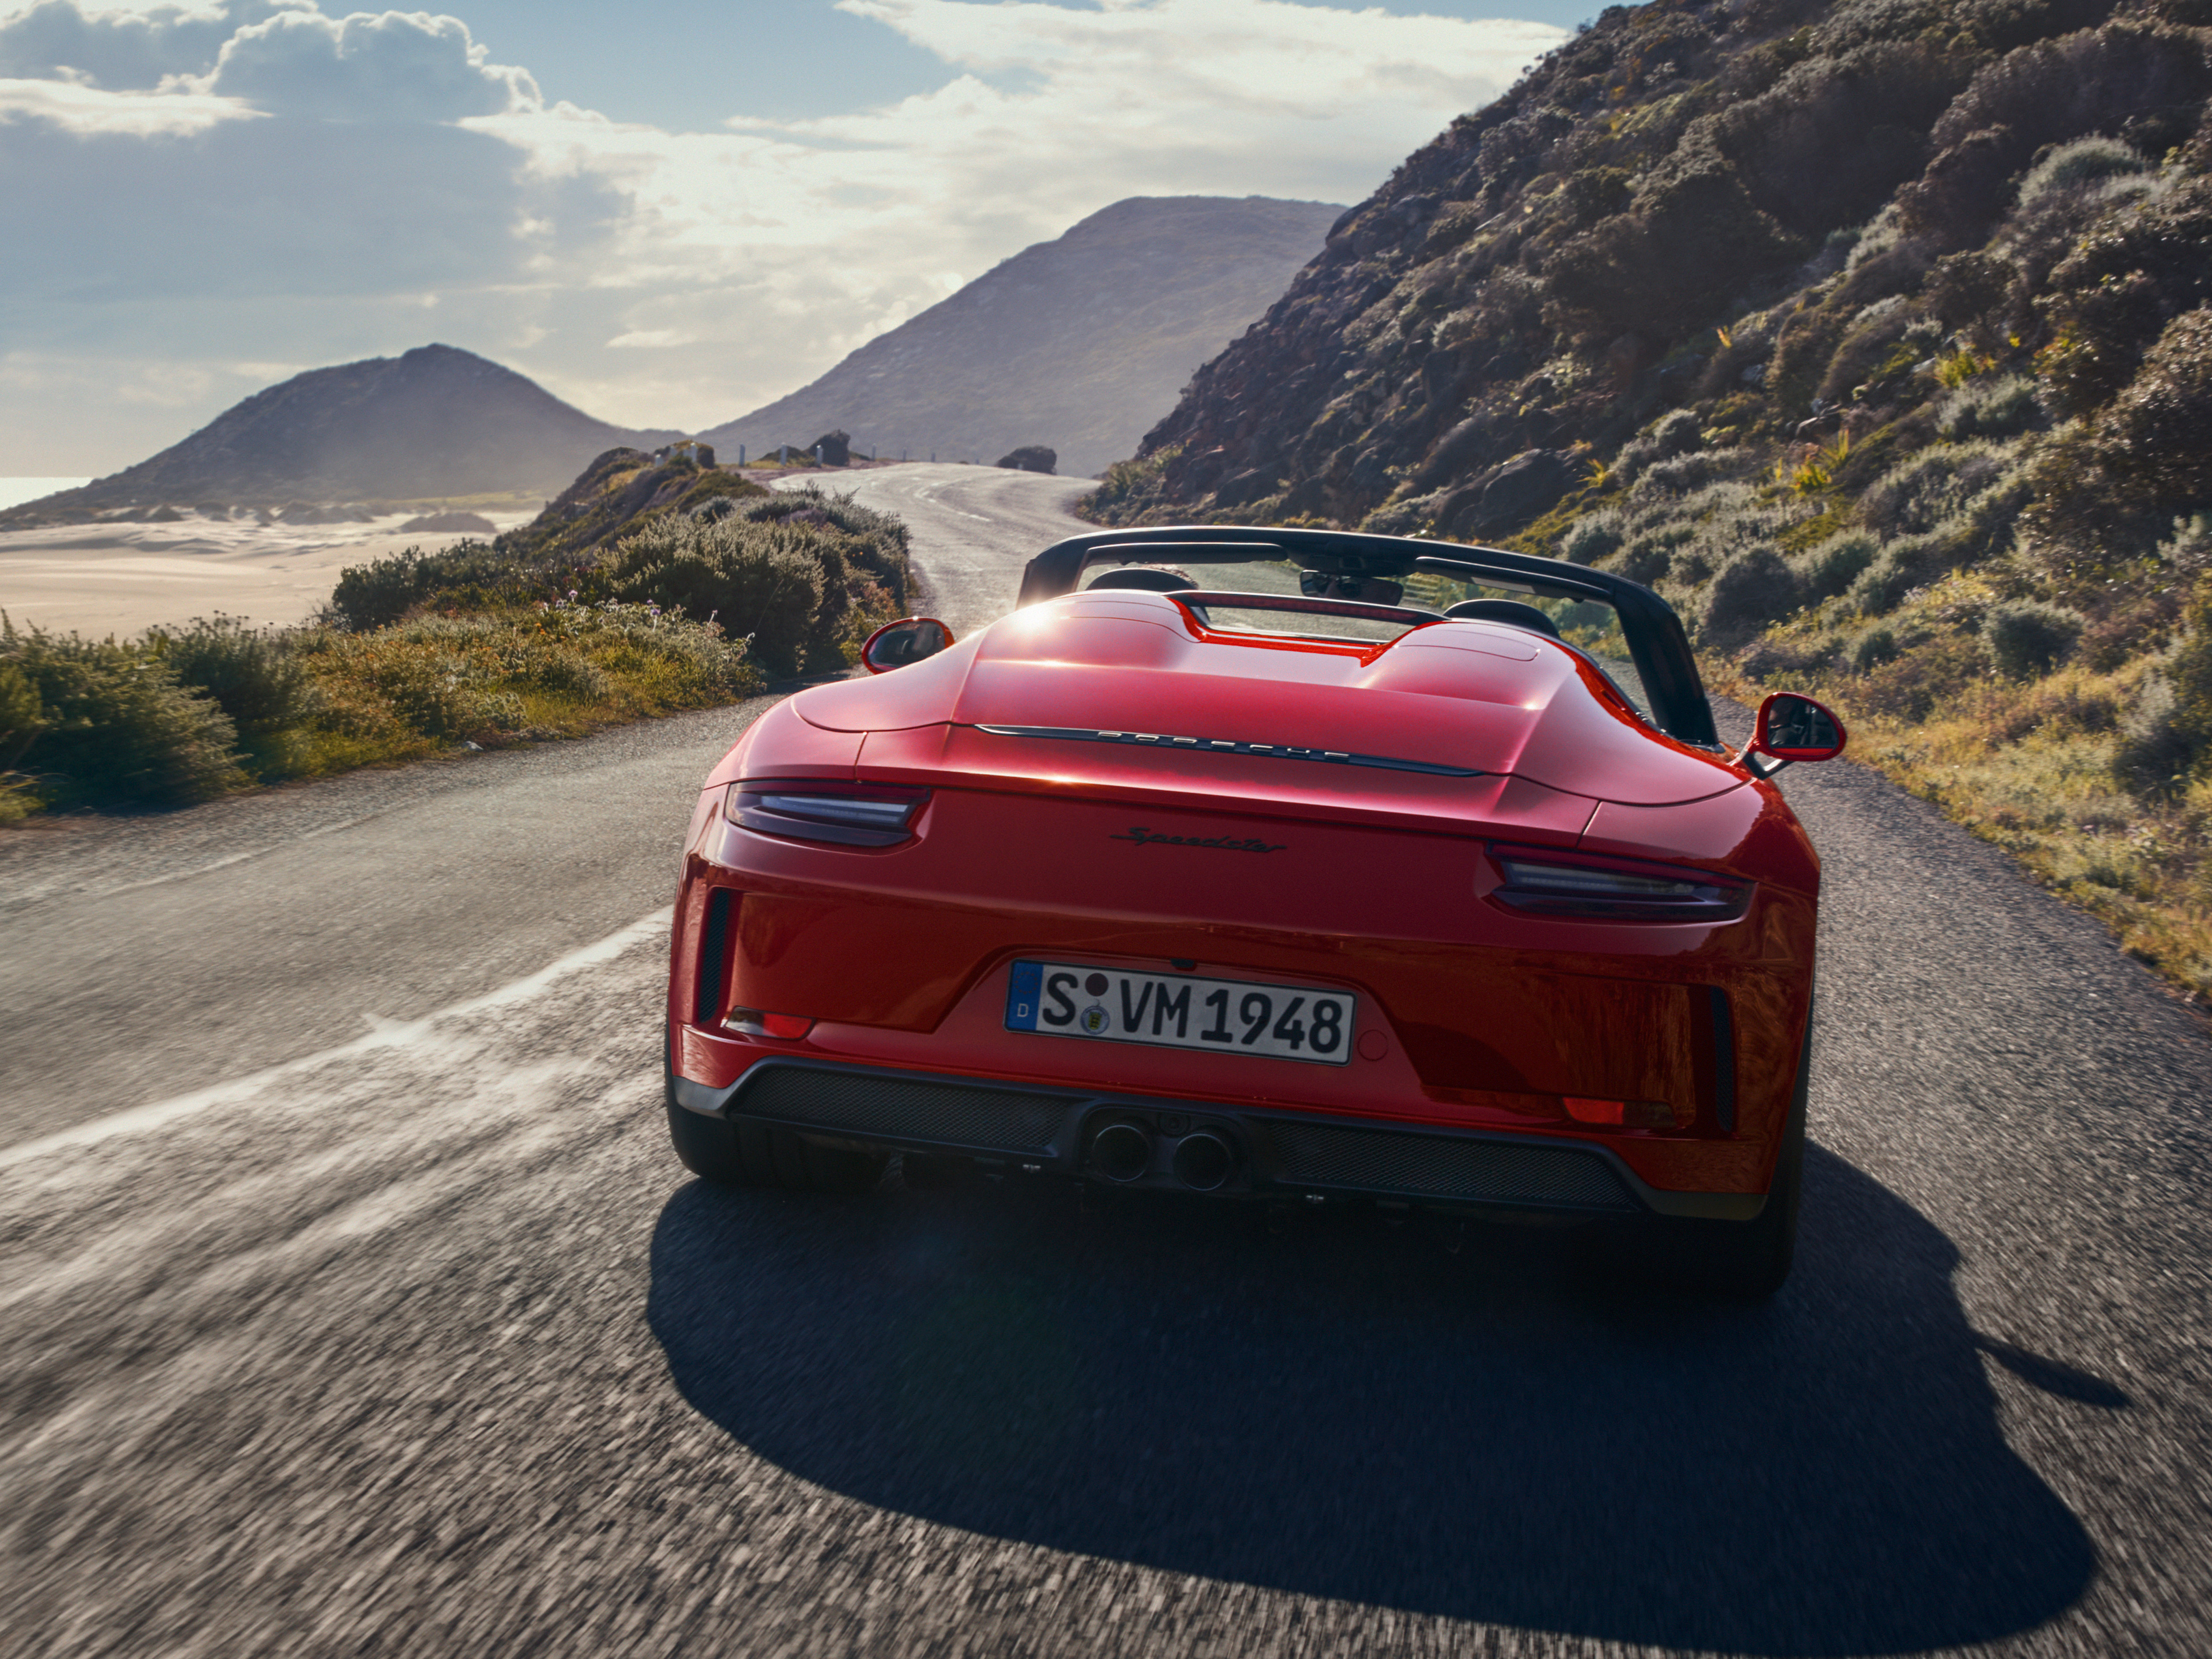 Red Porsche 911 convertible drives down the road at the foot of the mountain